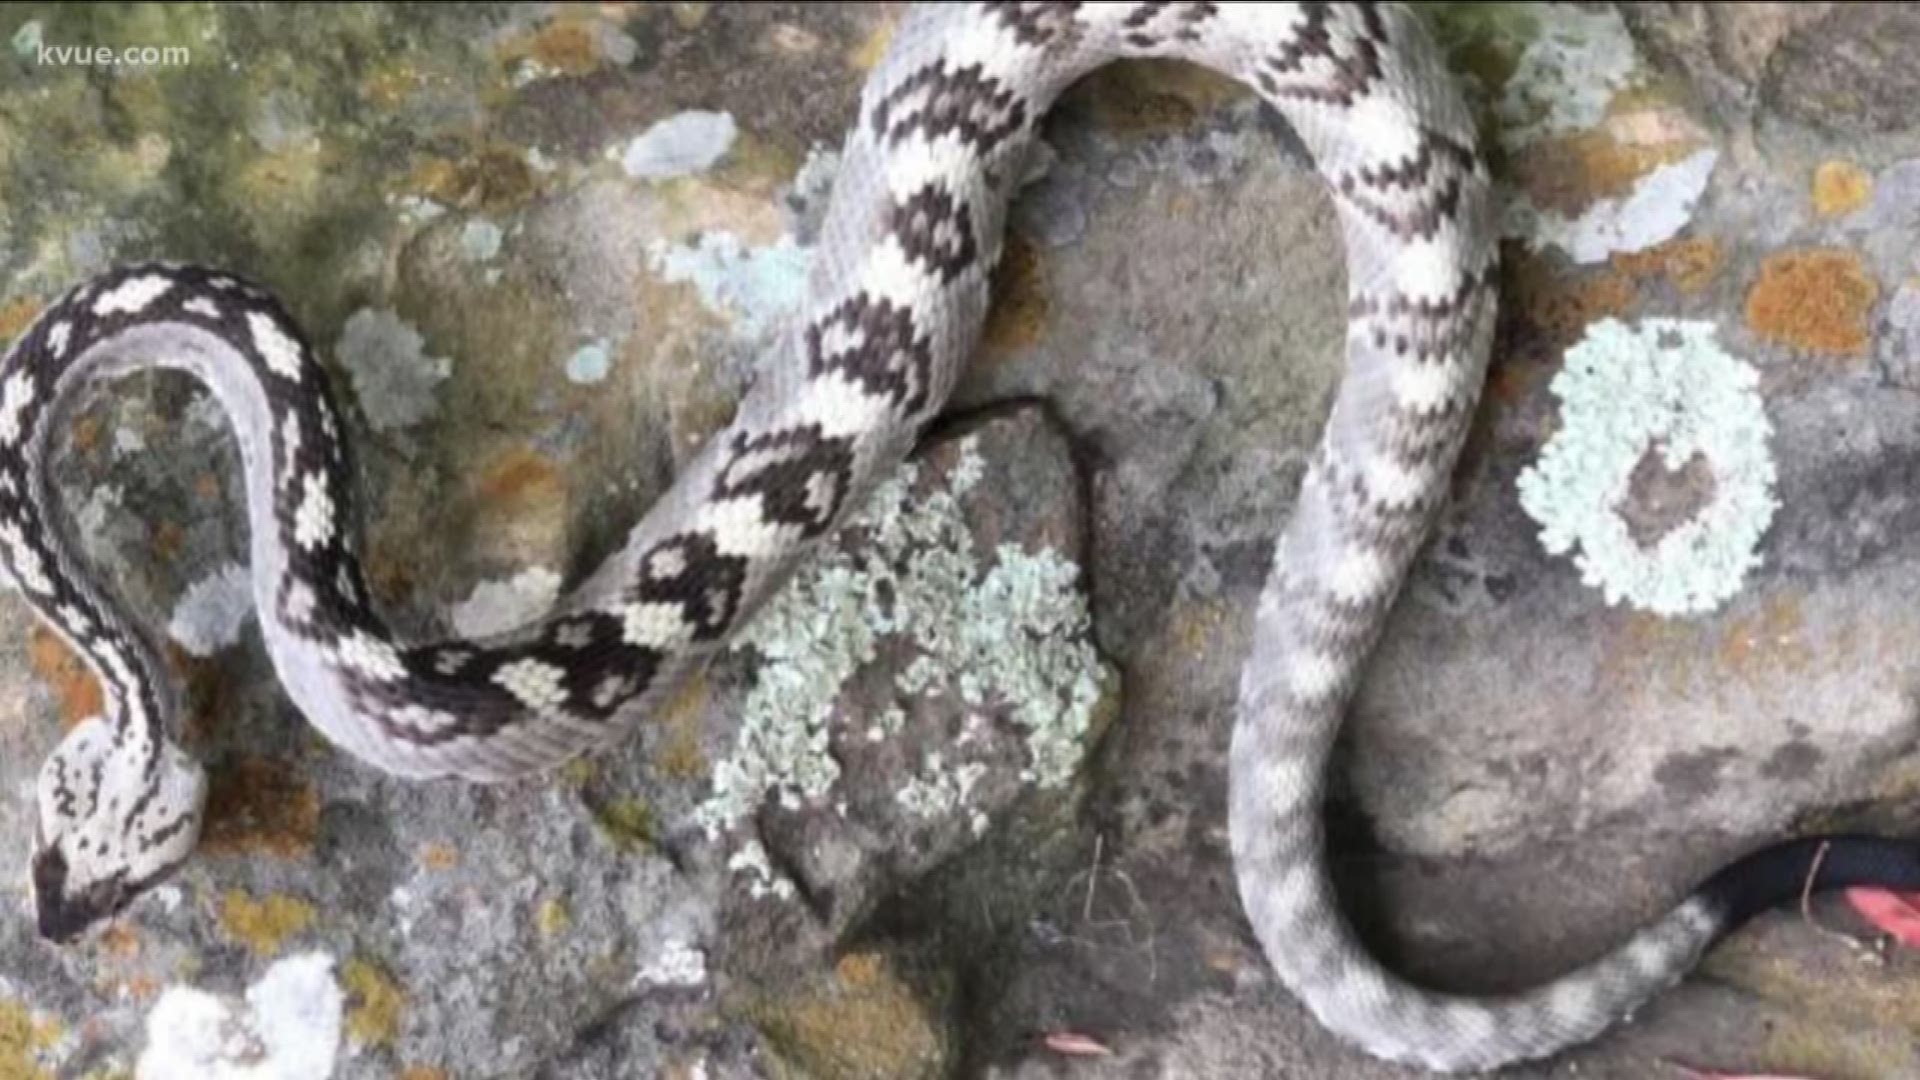 For the first time in 60 years, this extremely rare snake has been spotted in Travis County.
Jonestown police found the Eastern black-tailed rattlesnake Monday.